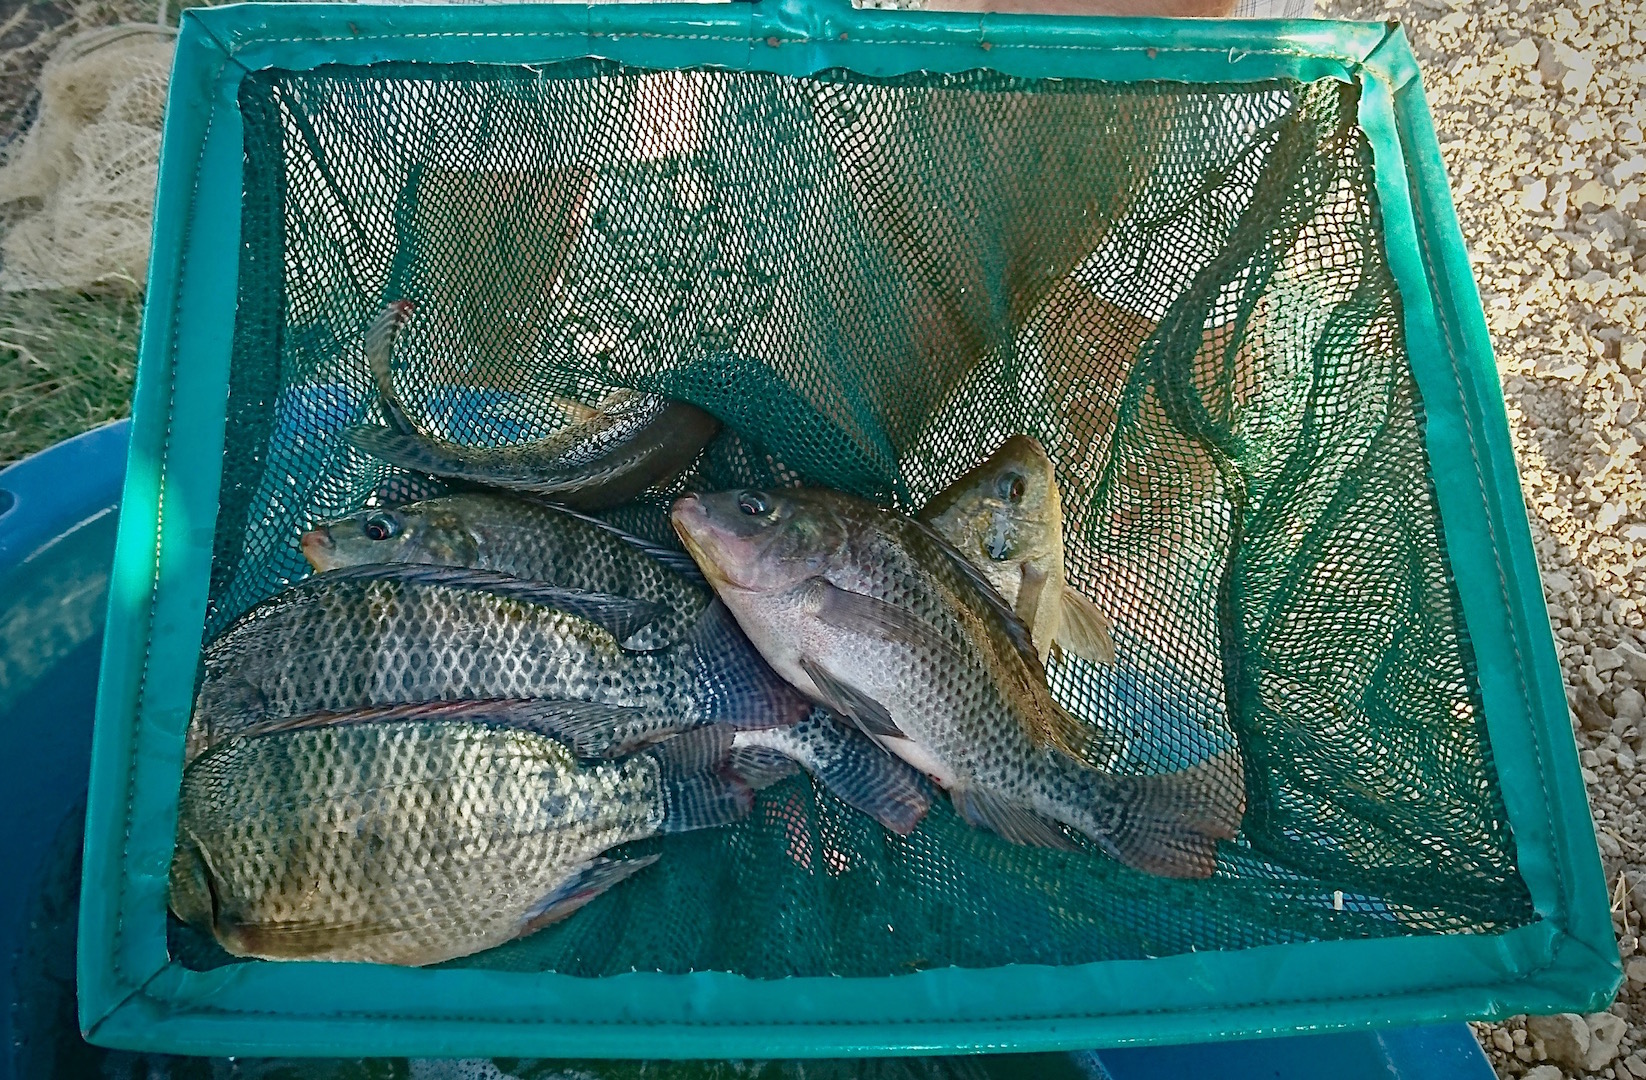 The tilapia are transferred live from the pond to a bucket straight to a freezer. Not only in this way do the fish remain super-fresh, it is also humane.